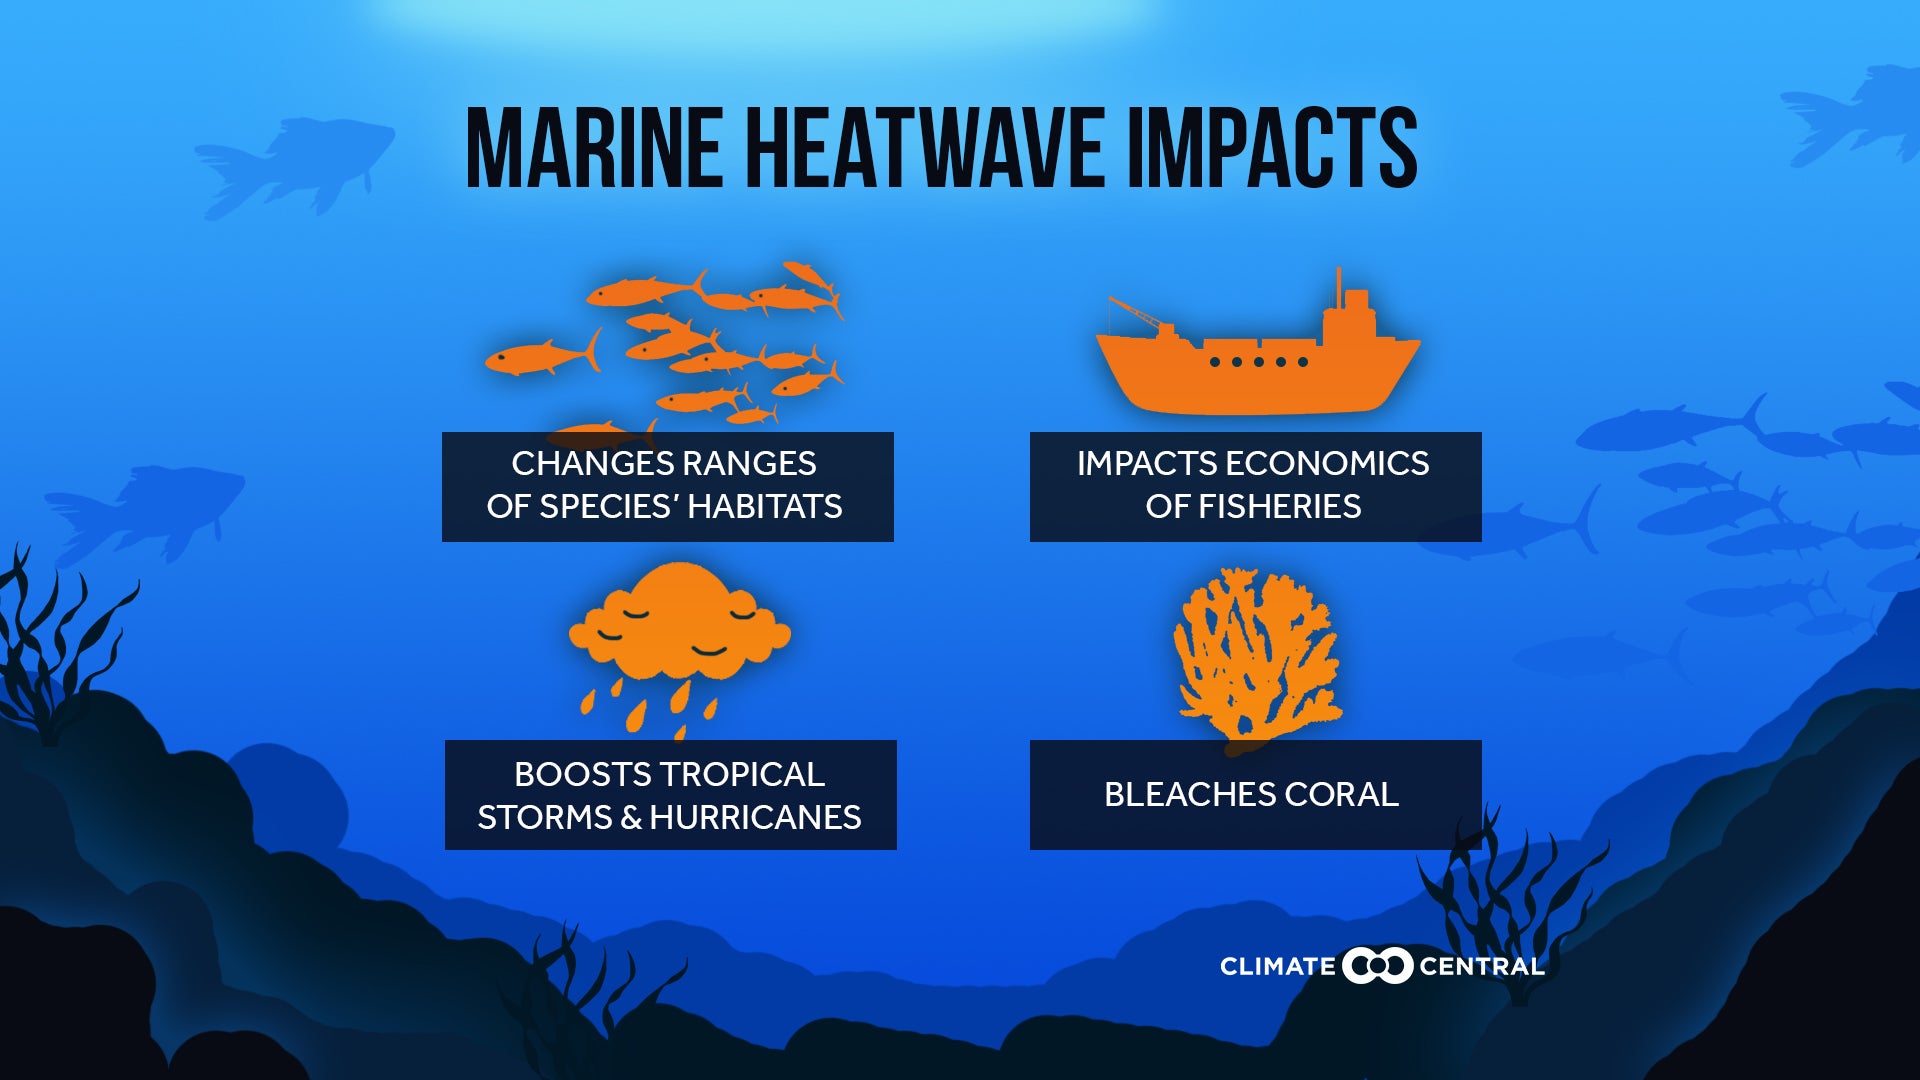 Graphic created by Climate Central shows marine heat wave impacts as small images against a dark blue background that is designed to represent the ocean. The impacts are 1) changes ranges of species' habitats, 2) impacts economics of fisheries, 3) boosts tropical storms and hurricanes, and 4) bleaches coral.